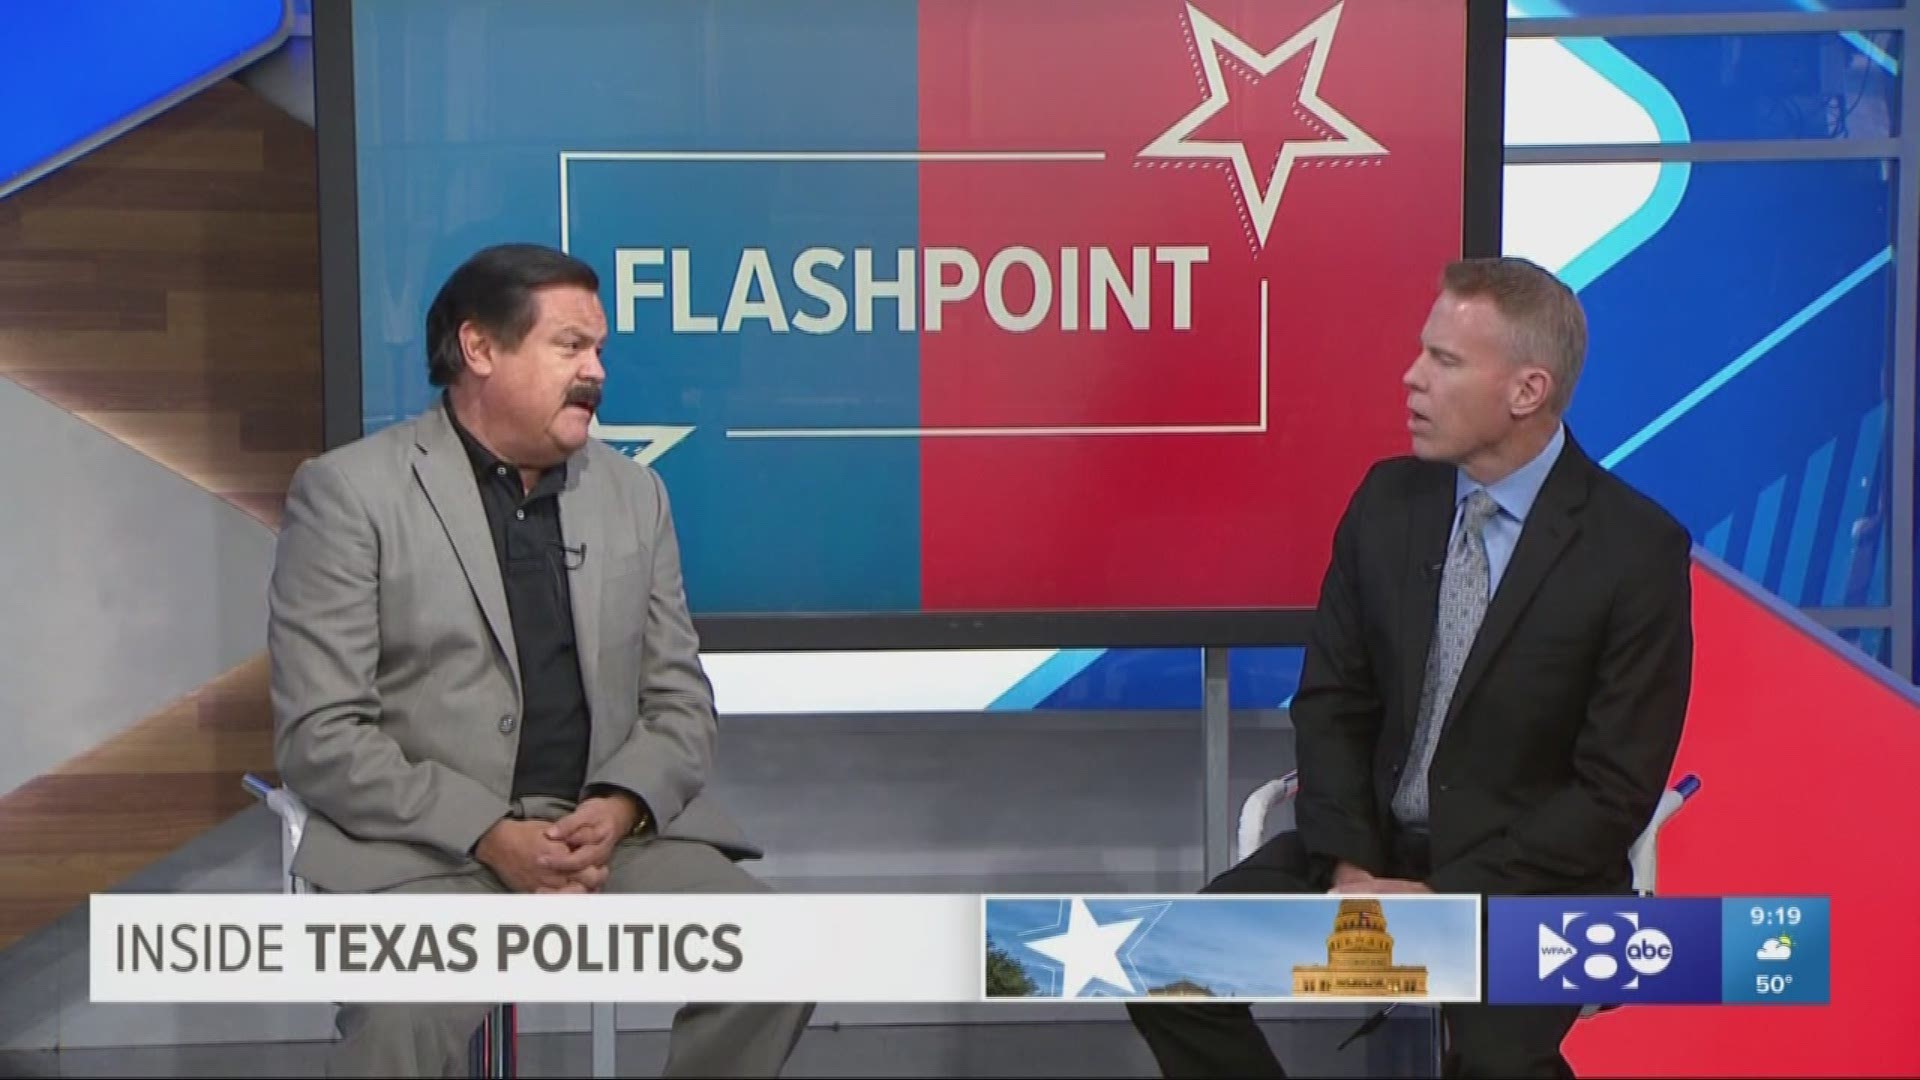 Here to share their views, we have Wade Emmert, the former chairman of the Dallas County Republican Party and Domingo Garcia, the national president of LULAC.